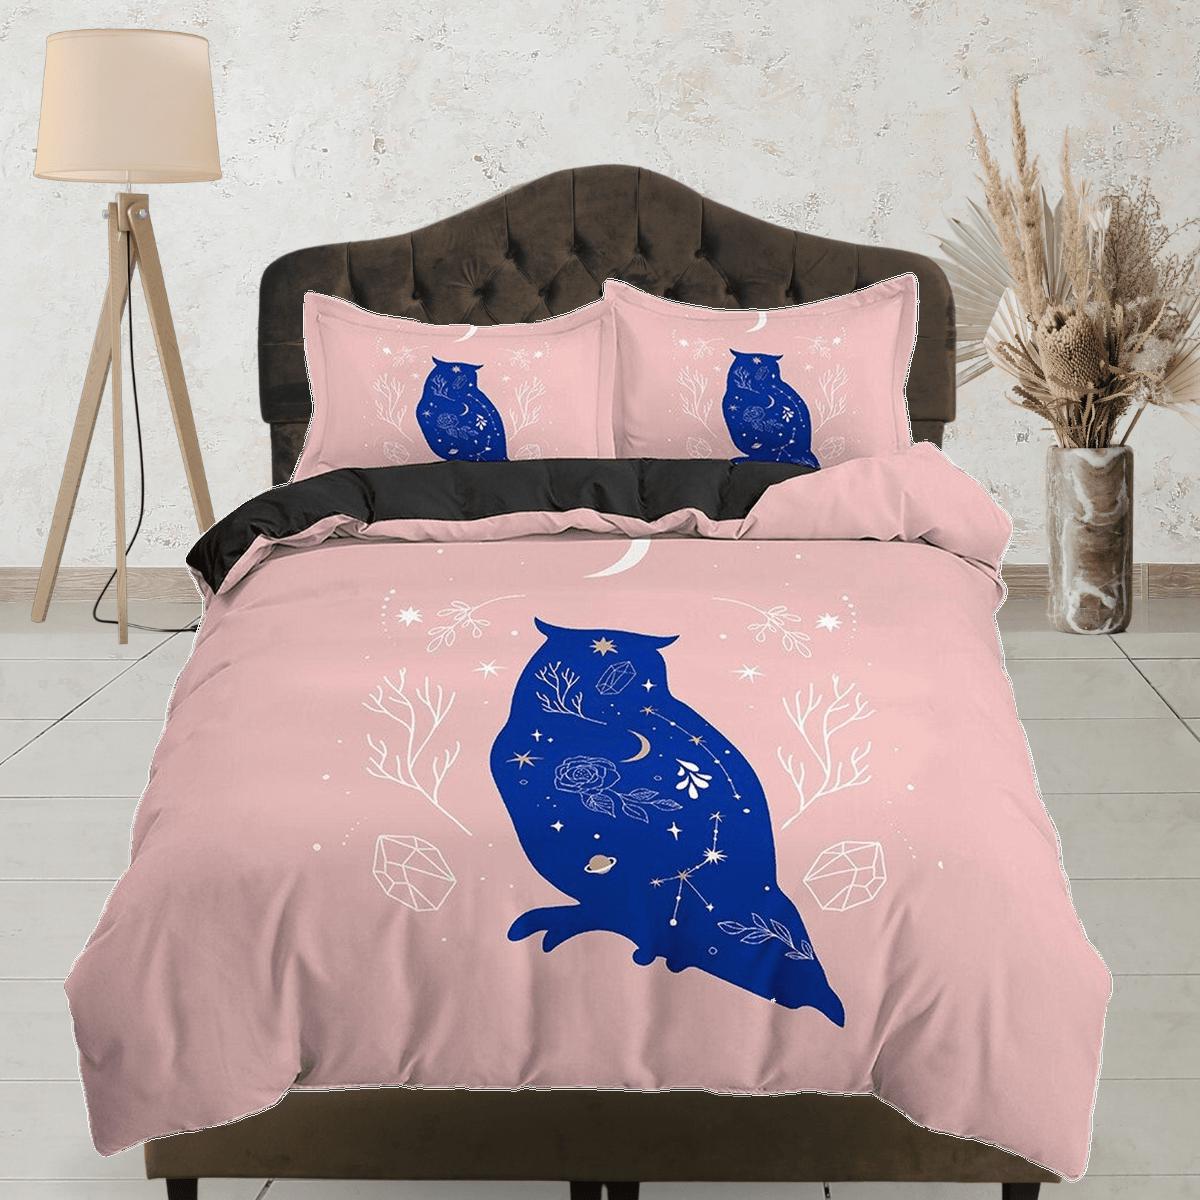 daintyduvet Boho Bedding Beige Pink, Duvet Cover Set with Blue Owl and Stars Celestial, Dorm Bedding, Aesthetic Bed Cover King Queen Full Twin Single